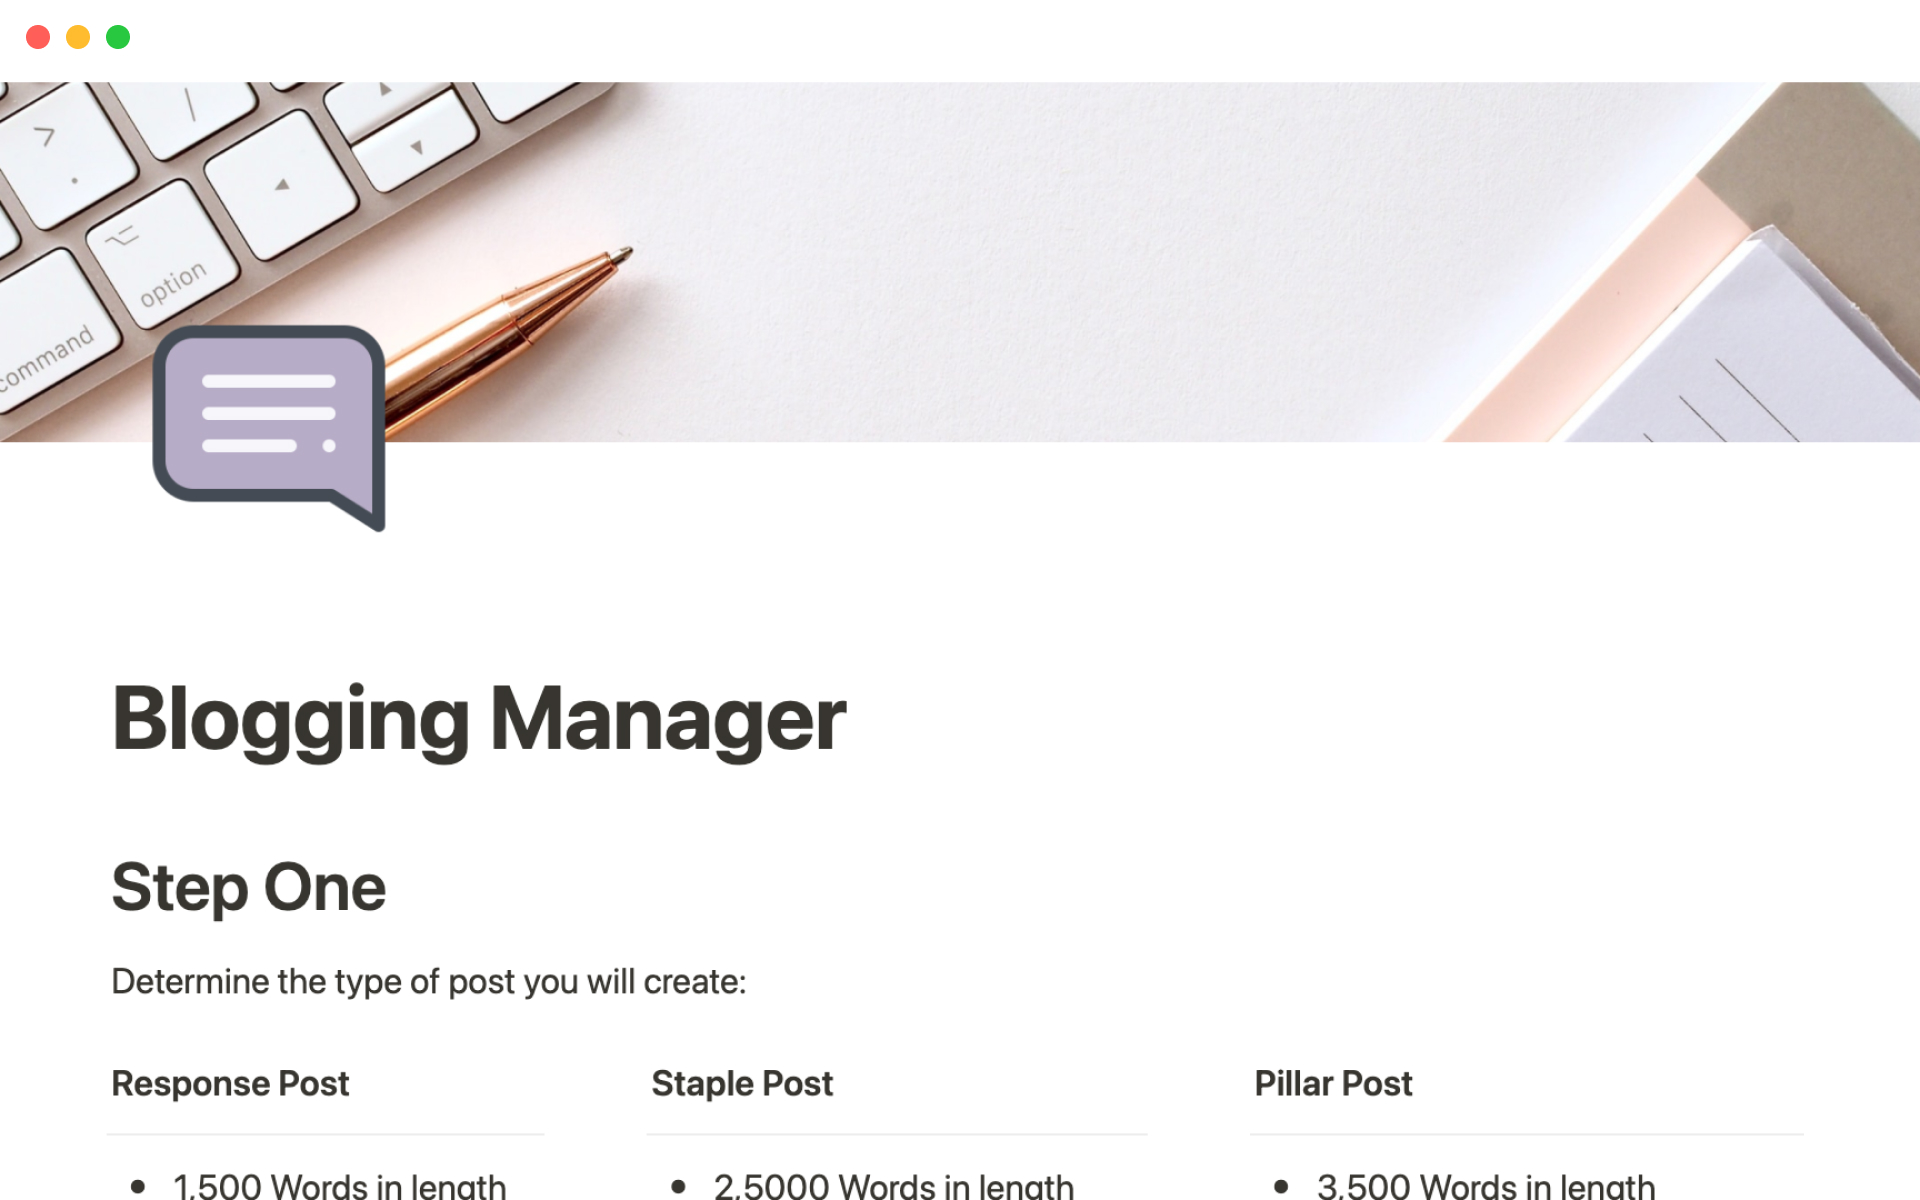 Manage all stages of writing posts with a comprehensive blogging manager.